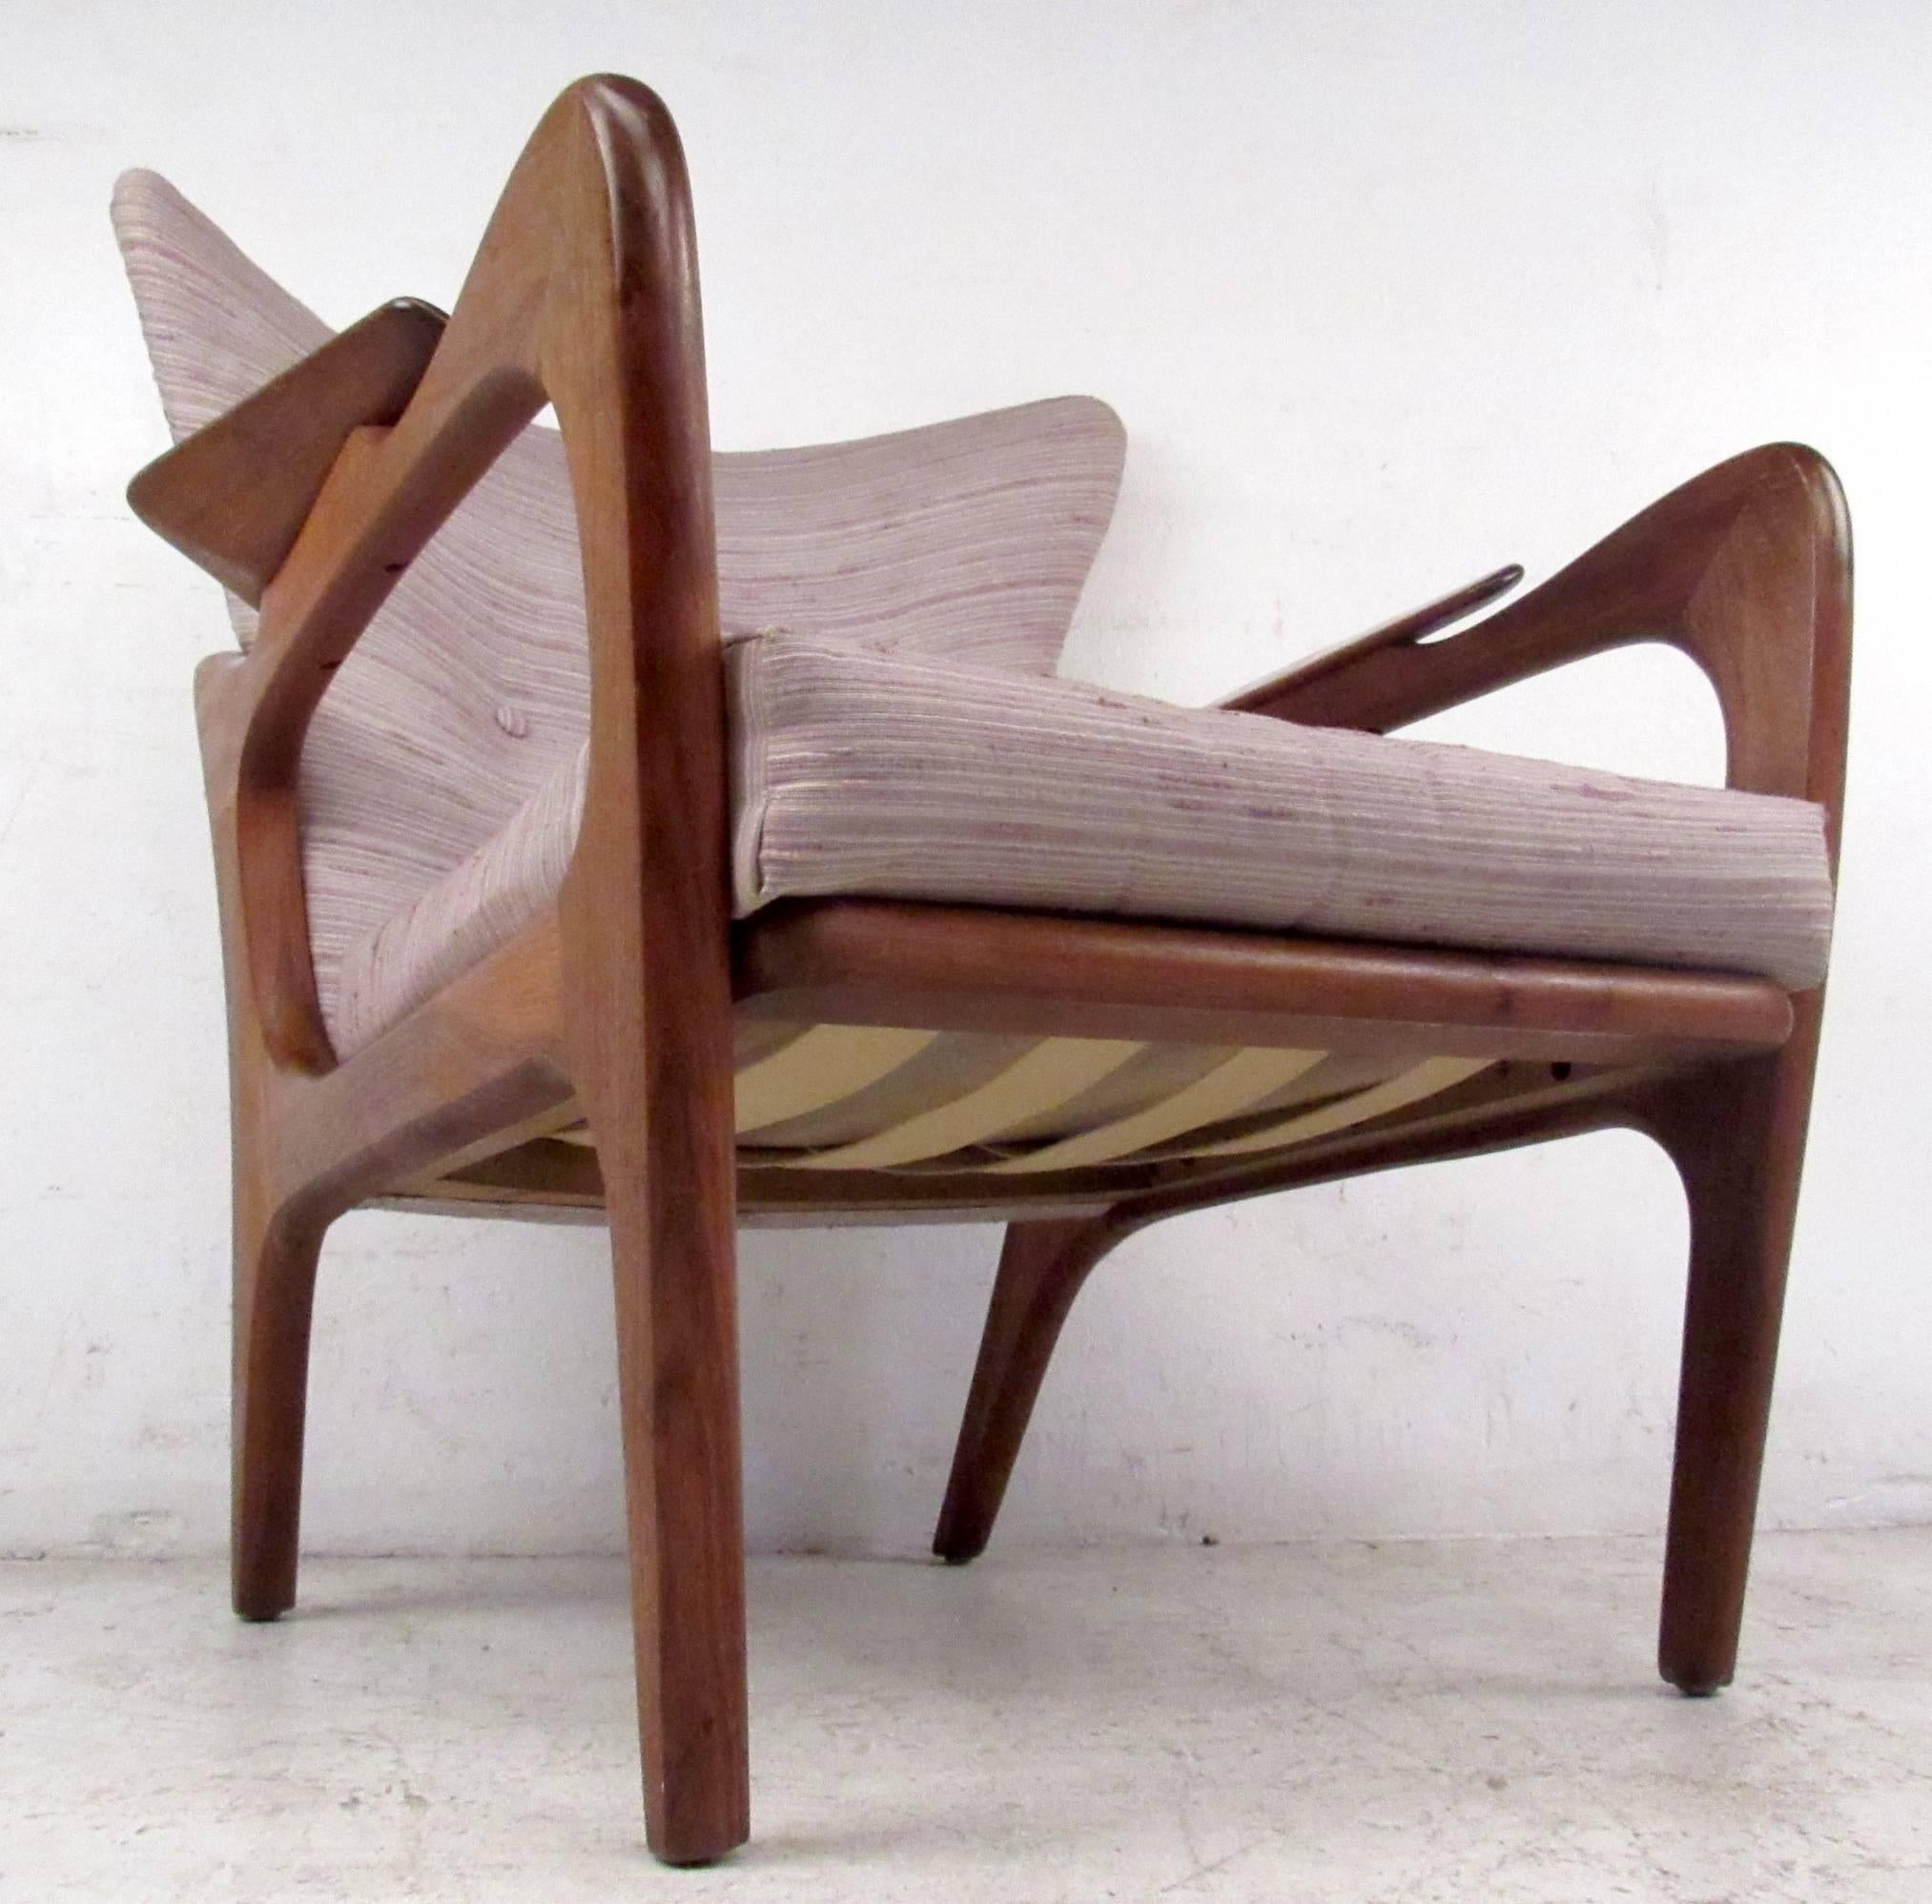 Vintage-modern lounge chair featuring sculpted body and upholstered seat and back, designed in the manner of Adrian Pearsall.

Please confirm item location NY or NJ with dealer.